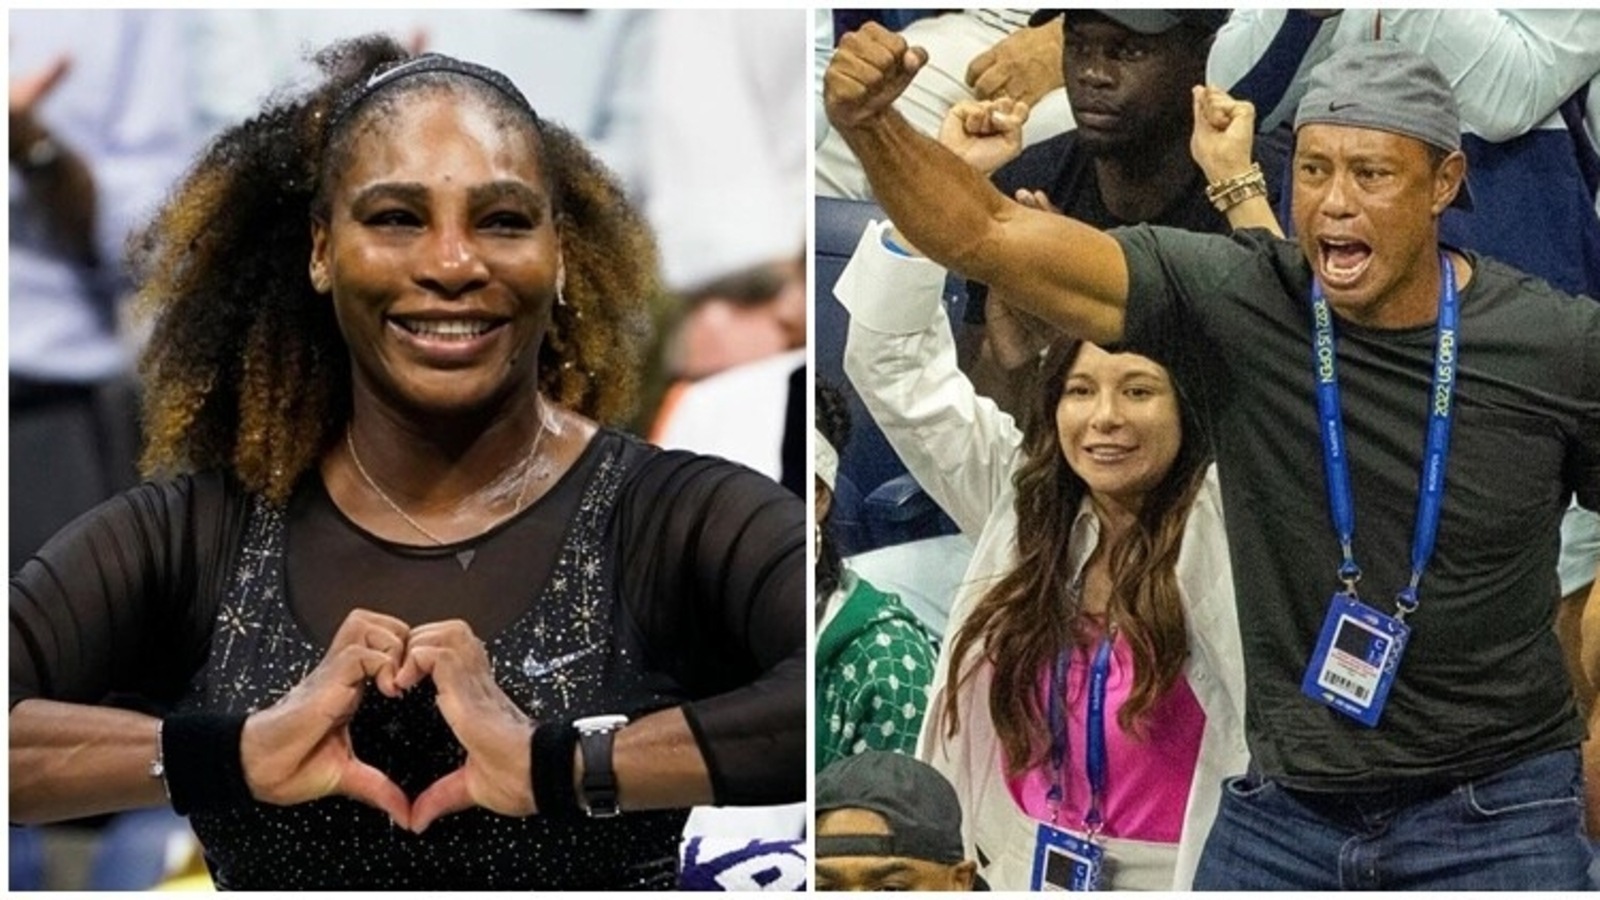 ‘I love you little sis’: Tiger Woods pens inspiring message for ‘greatest’ Serena Williams after US Open exit